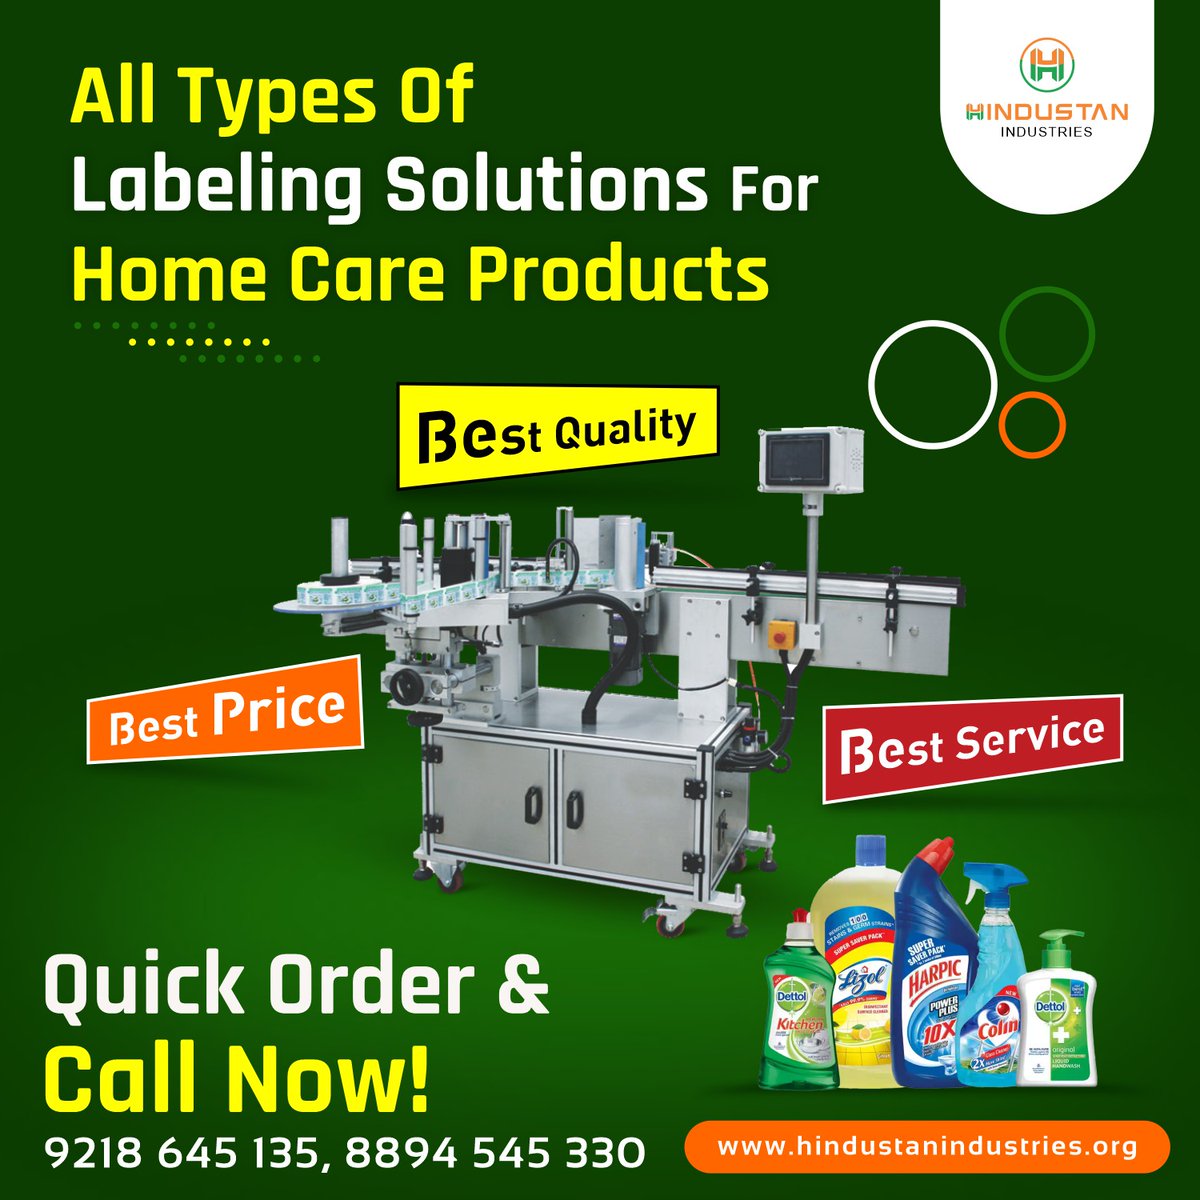 We make all types of bottle labeling solutions for home care products
🌐 Visit us at: hindustanindustries.org

📲 Contact Us if you are interested in any of our products! 😍
📞 Call Naresh at +91-9218 645 135
📞 Call Sagar at +91-8894 545 330

#labelingsolutions #labelingmachine